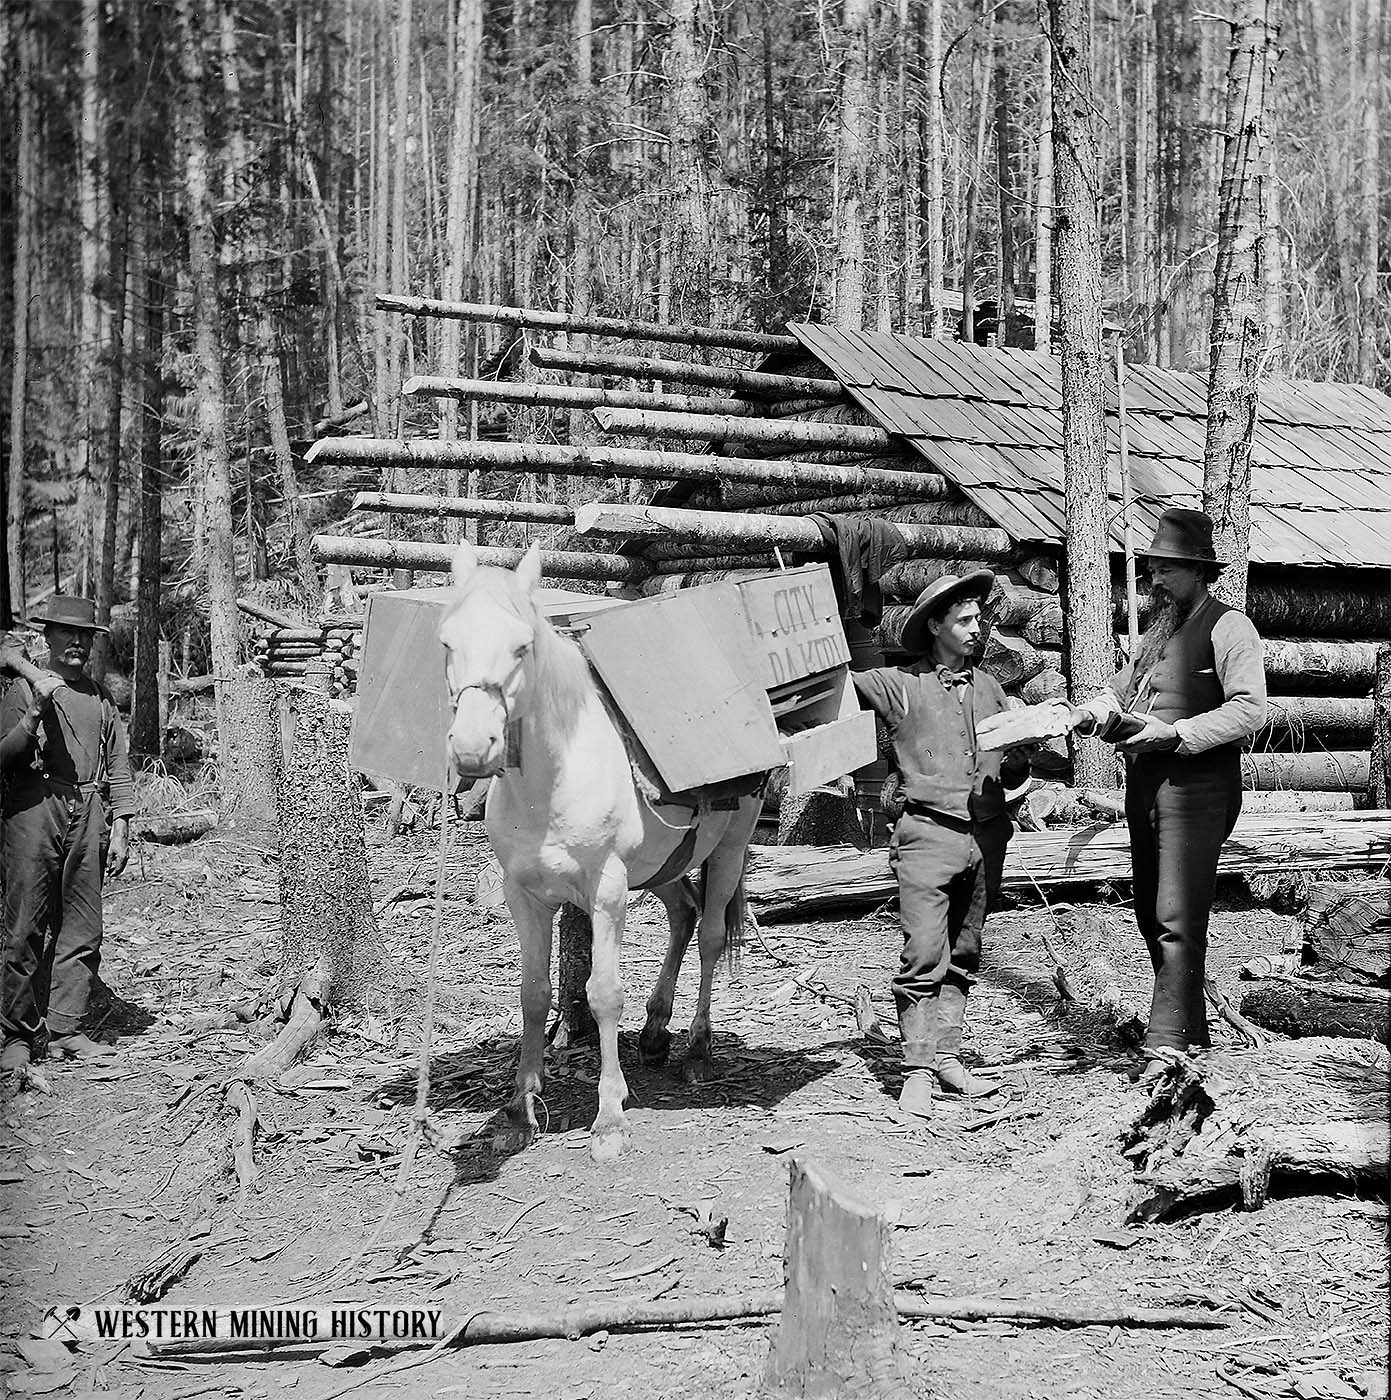 Baker delivers bread to miners near Murray, Idaho 1884